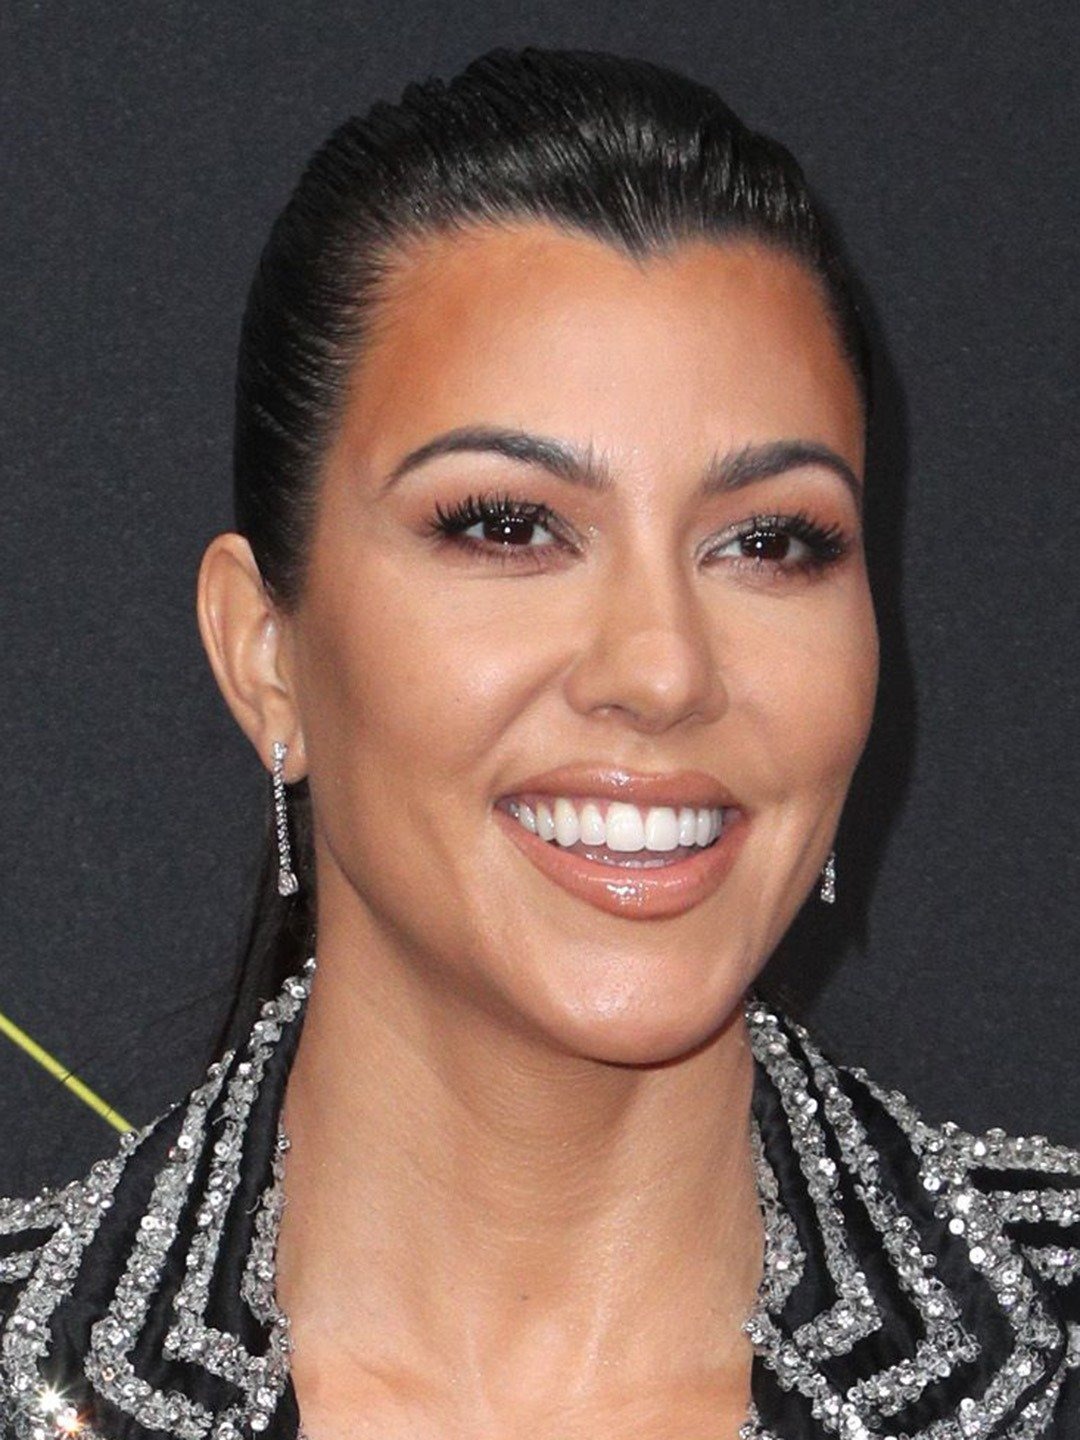 Kourtney Is Not ‘Comfortable’ Filming ‘The Kardashians’ Amid Family ...